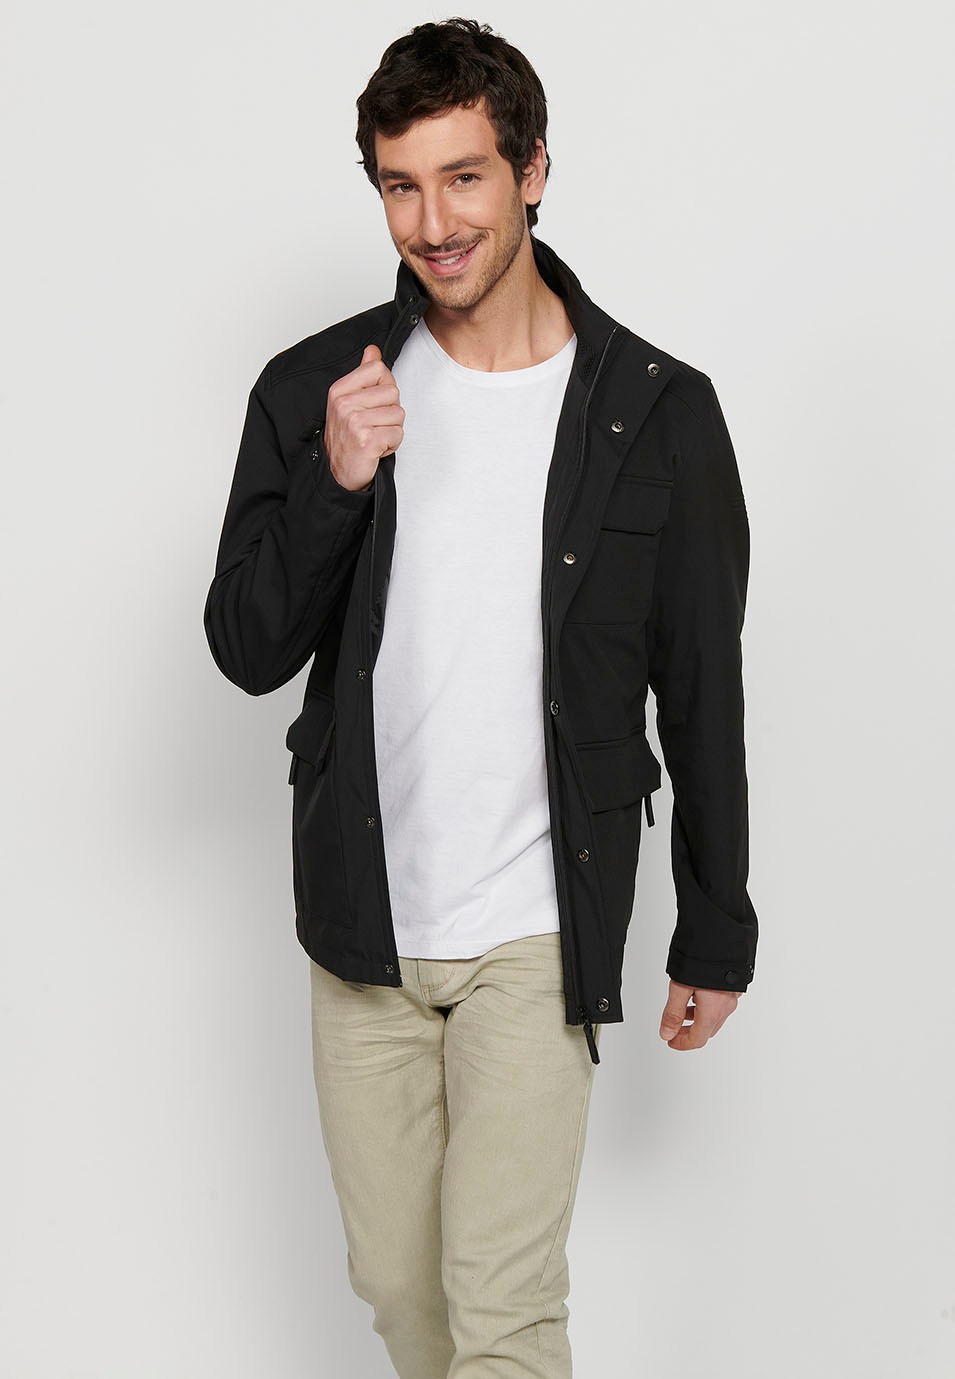 Long Black High Neck Windbreaker Jacket with Front Zipper Closure and Four Flap Pockets for Men 4